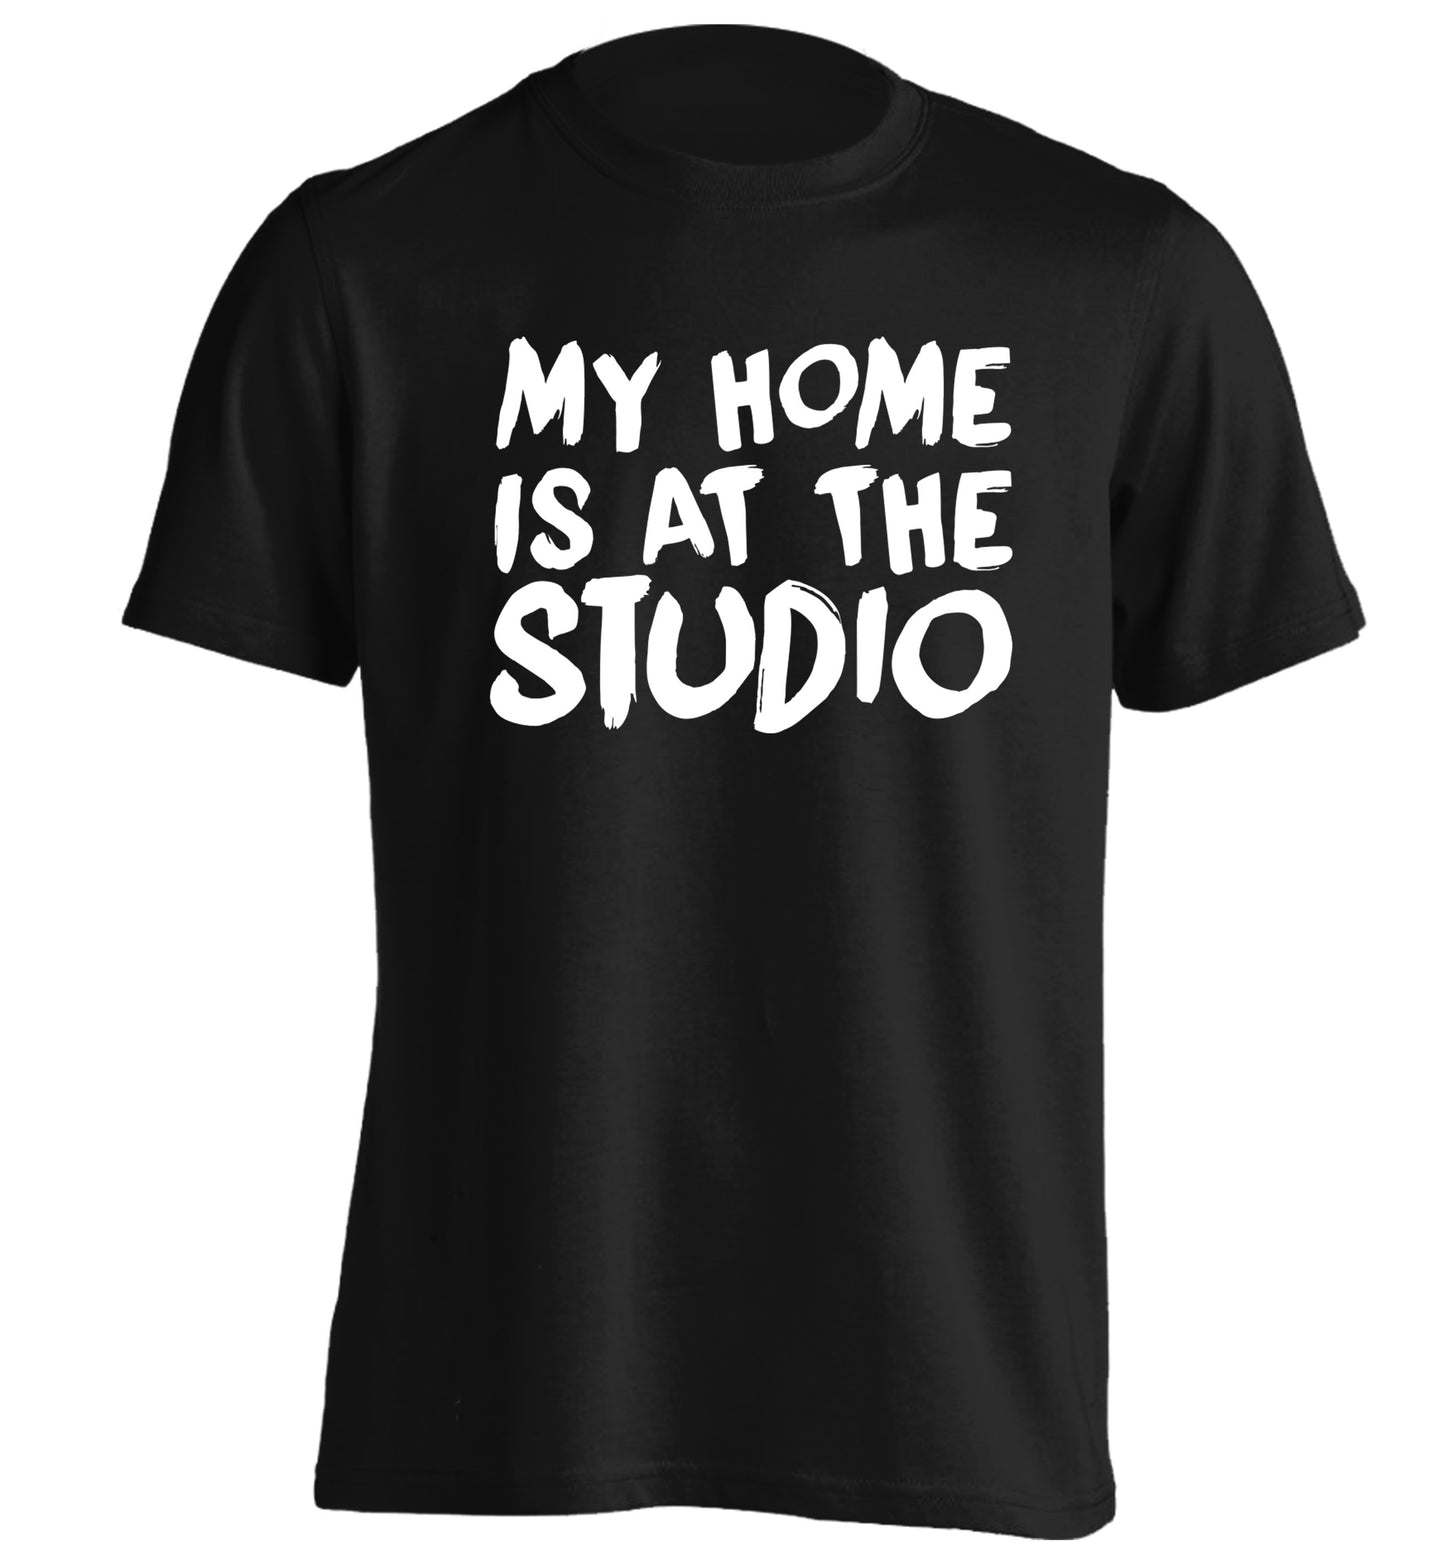 My home is at the studio adults unisex black Tshirt 2XL